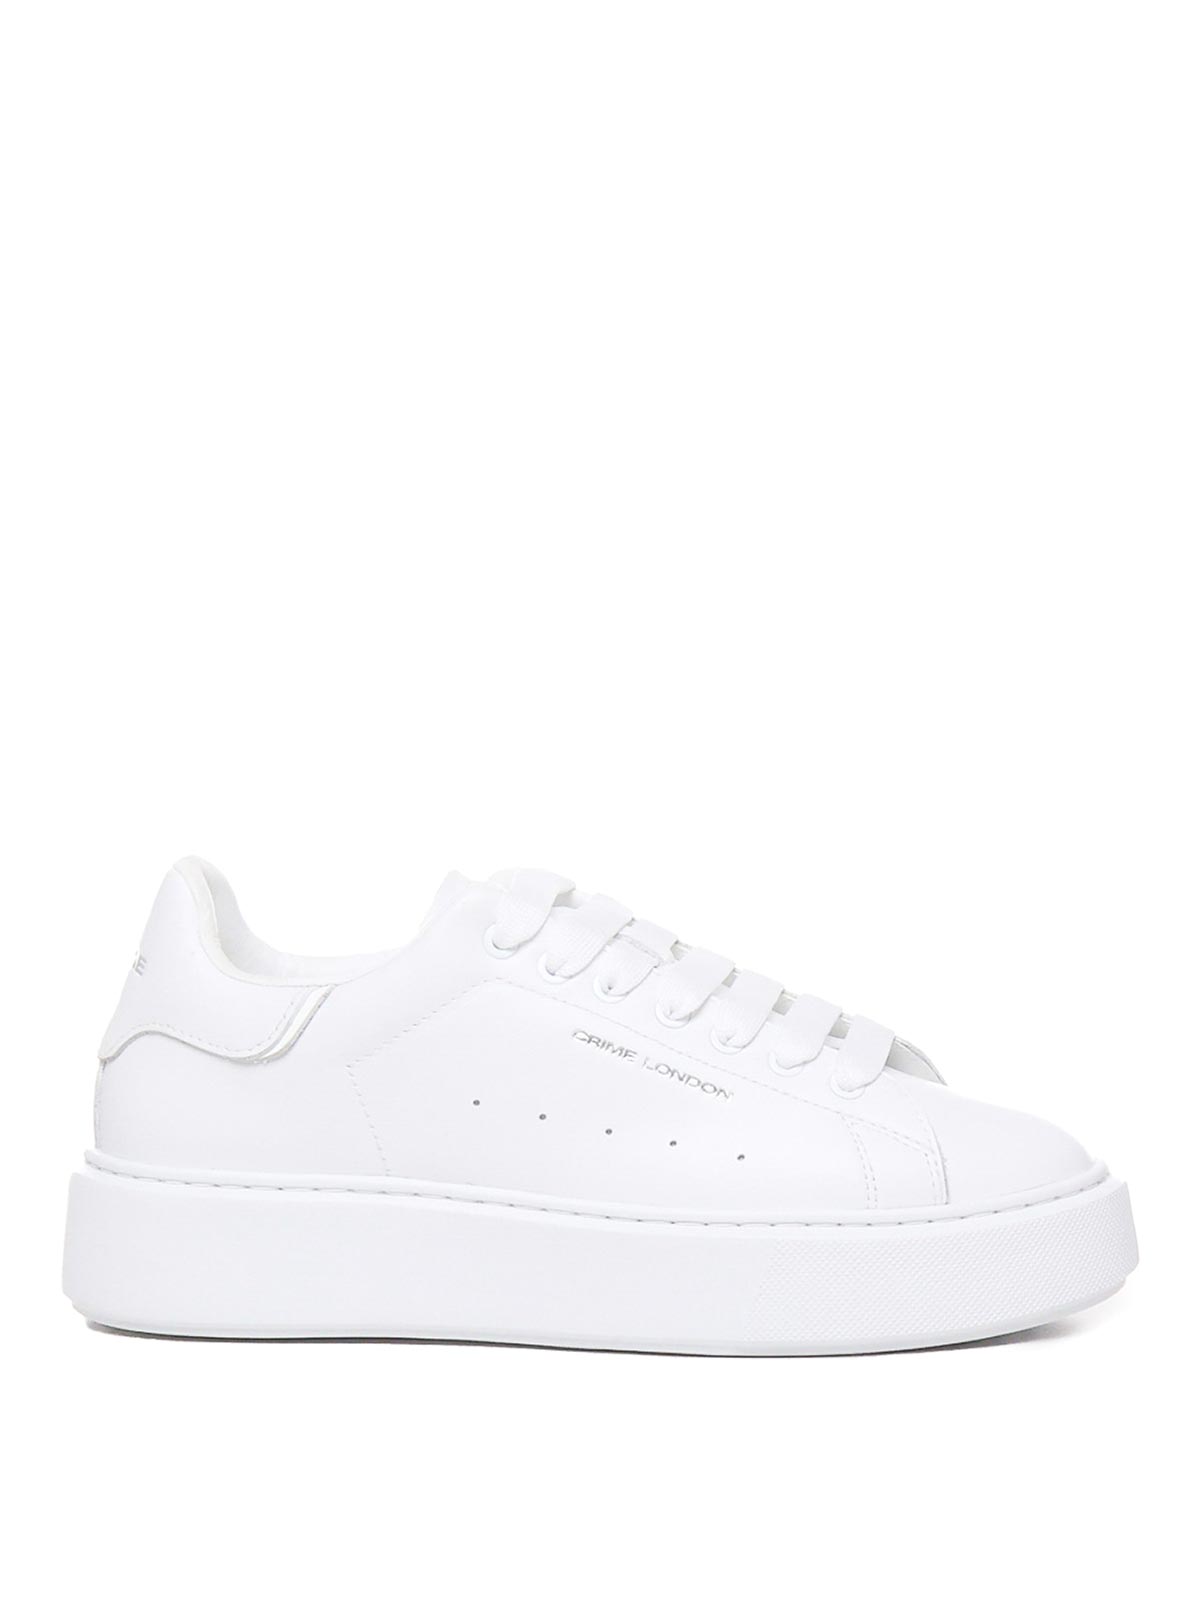 Crime London Elevate Sneakers In White